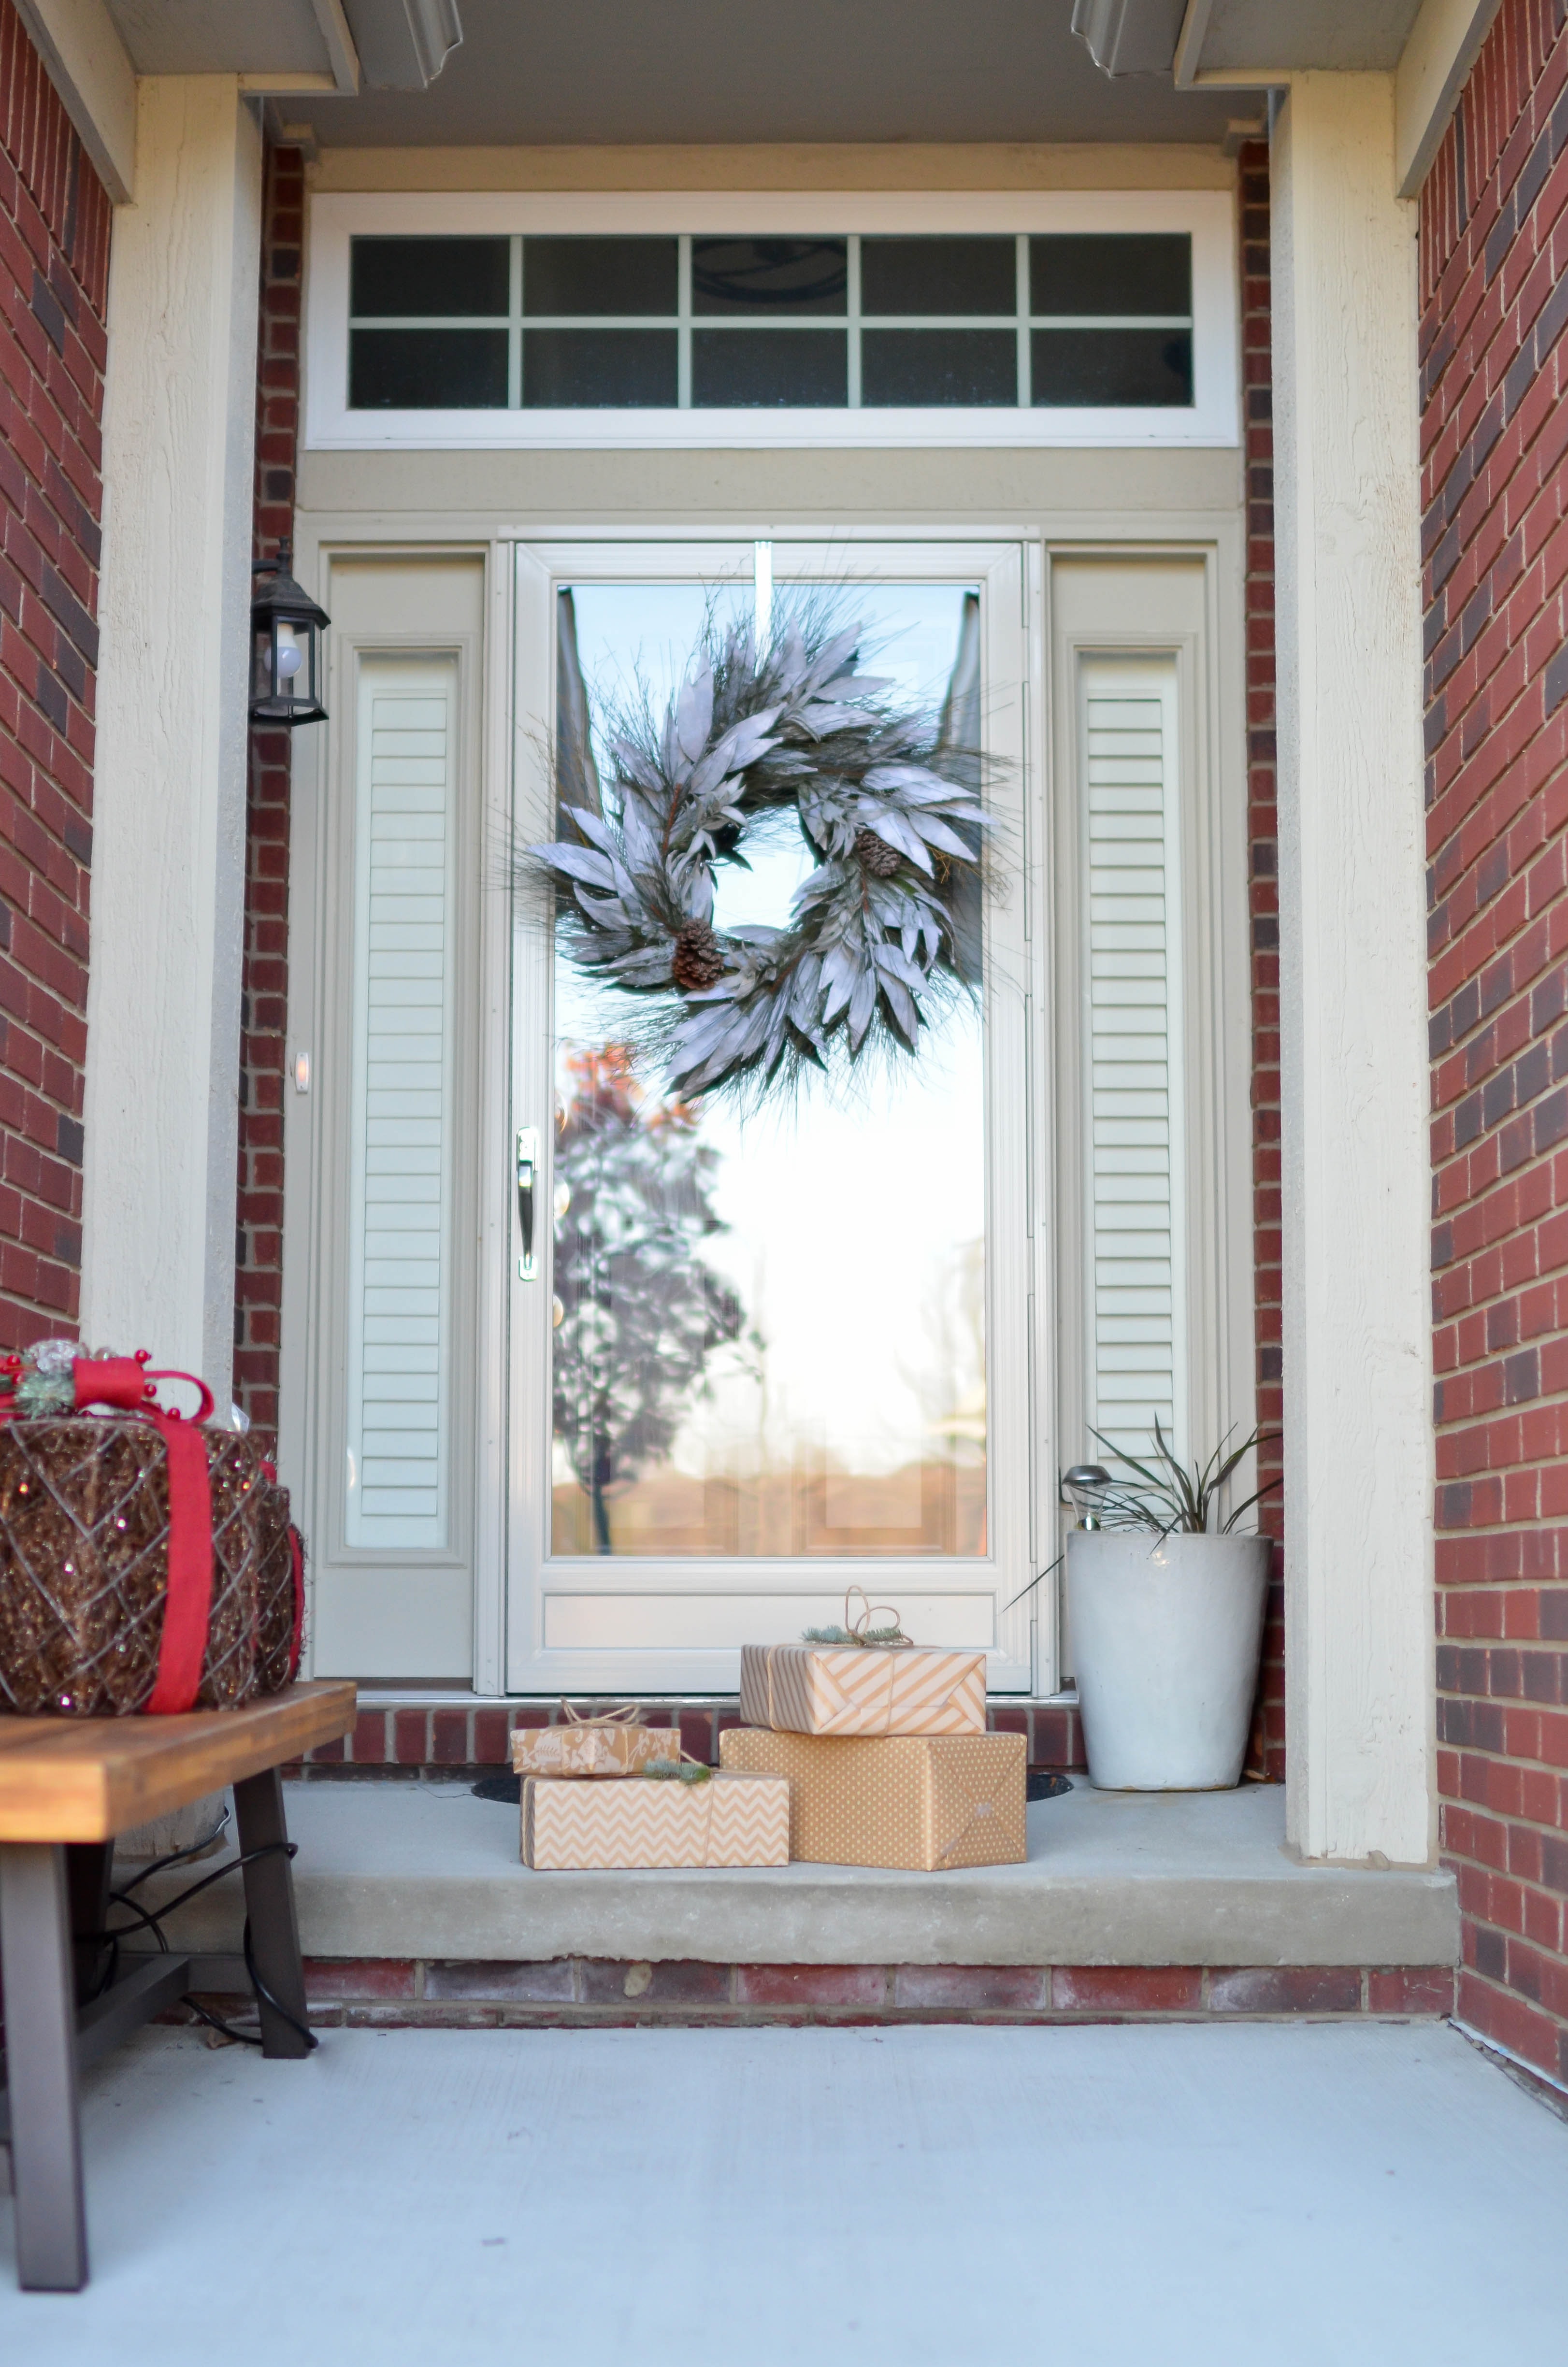 Four brown gift boxes near a glass paneled door with wreath photo